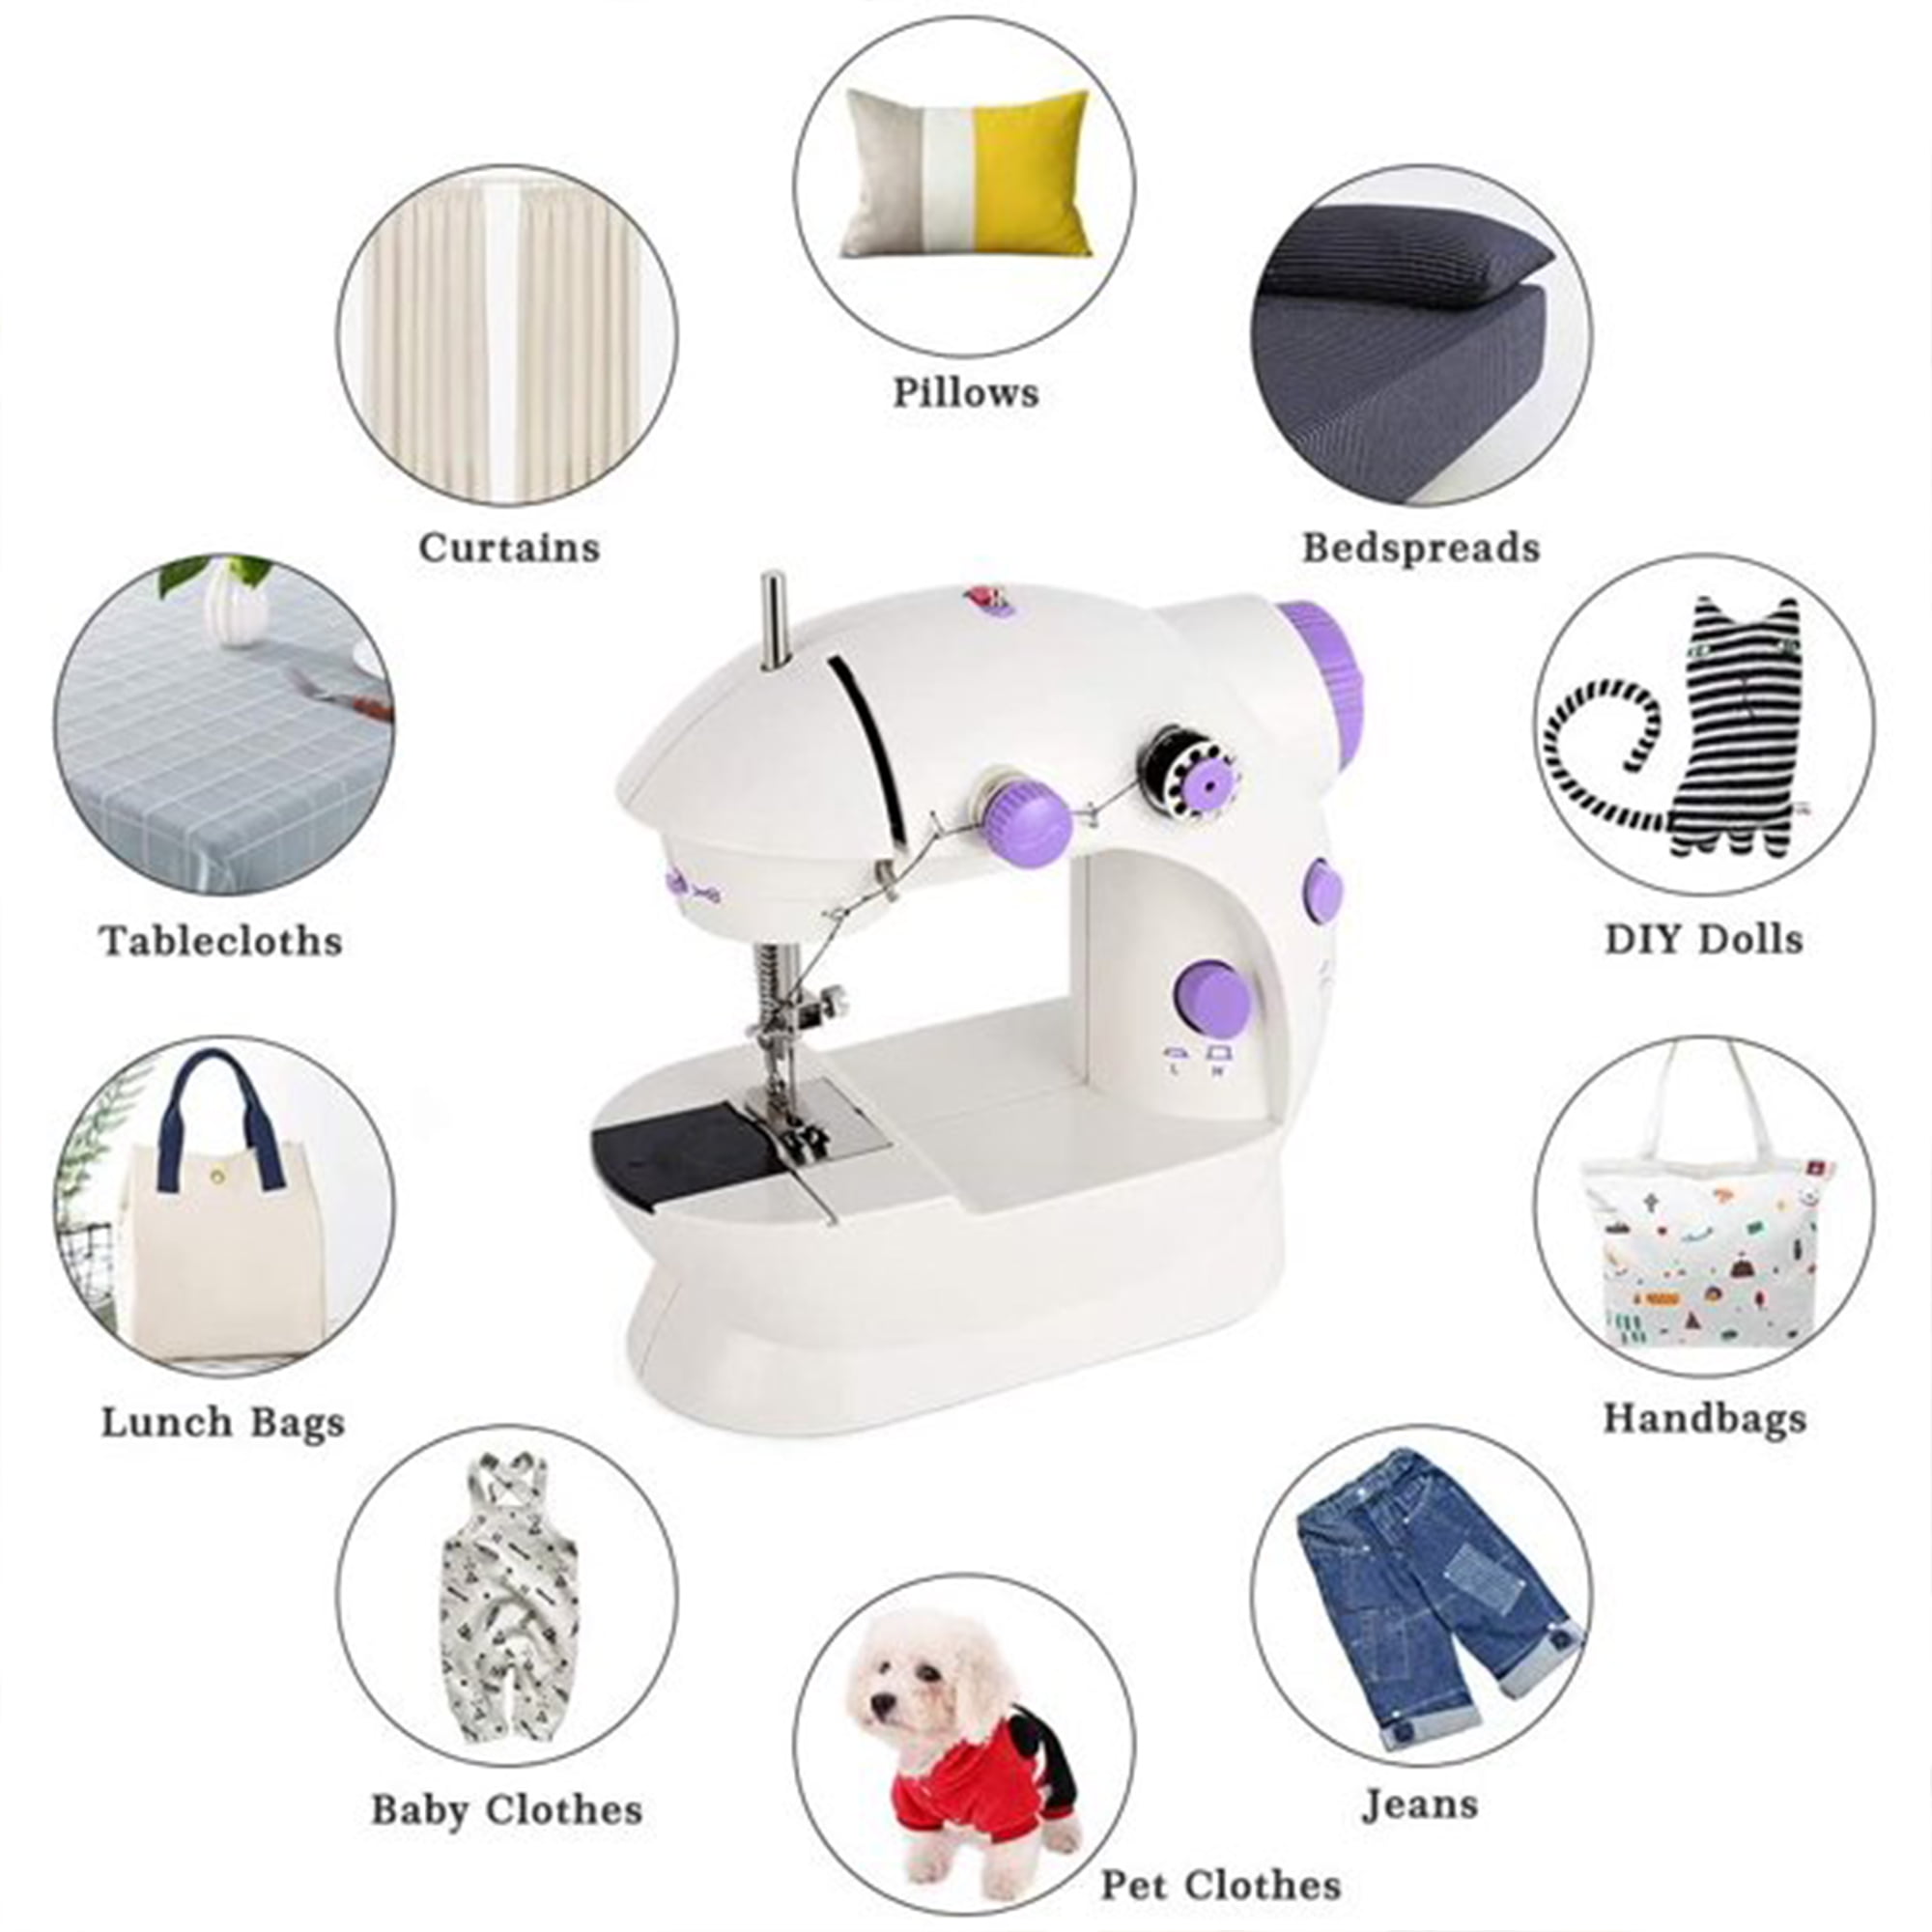 Buy Sewing Machine, Small Sewing Machine with Extension Table for  Beginners, Kids Sewing Machine Adjustable 2 Speed with Sewing Kits, Best  Gift for Kids Women Space Saver, DIY, Household and Travel Online